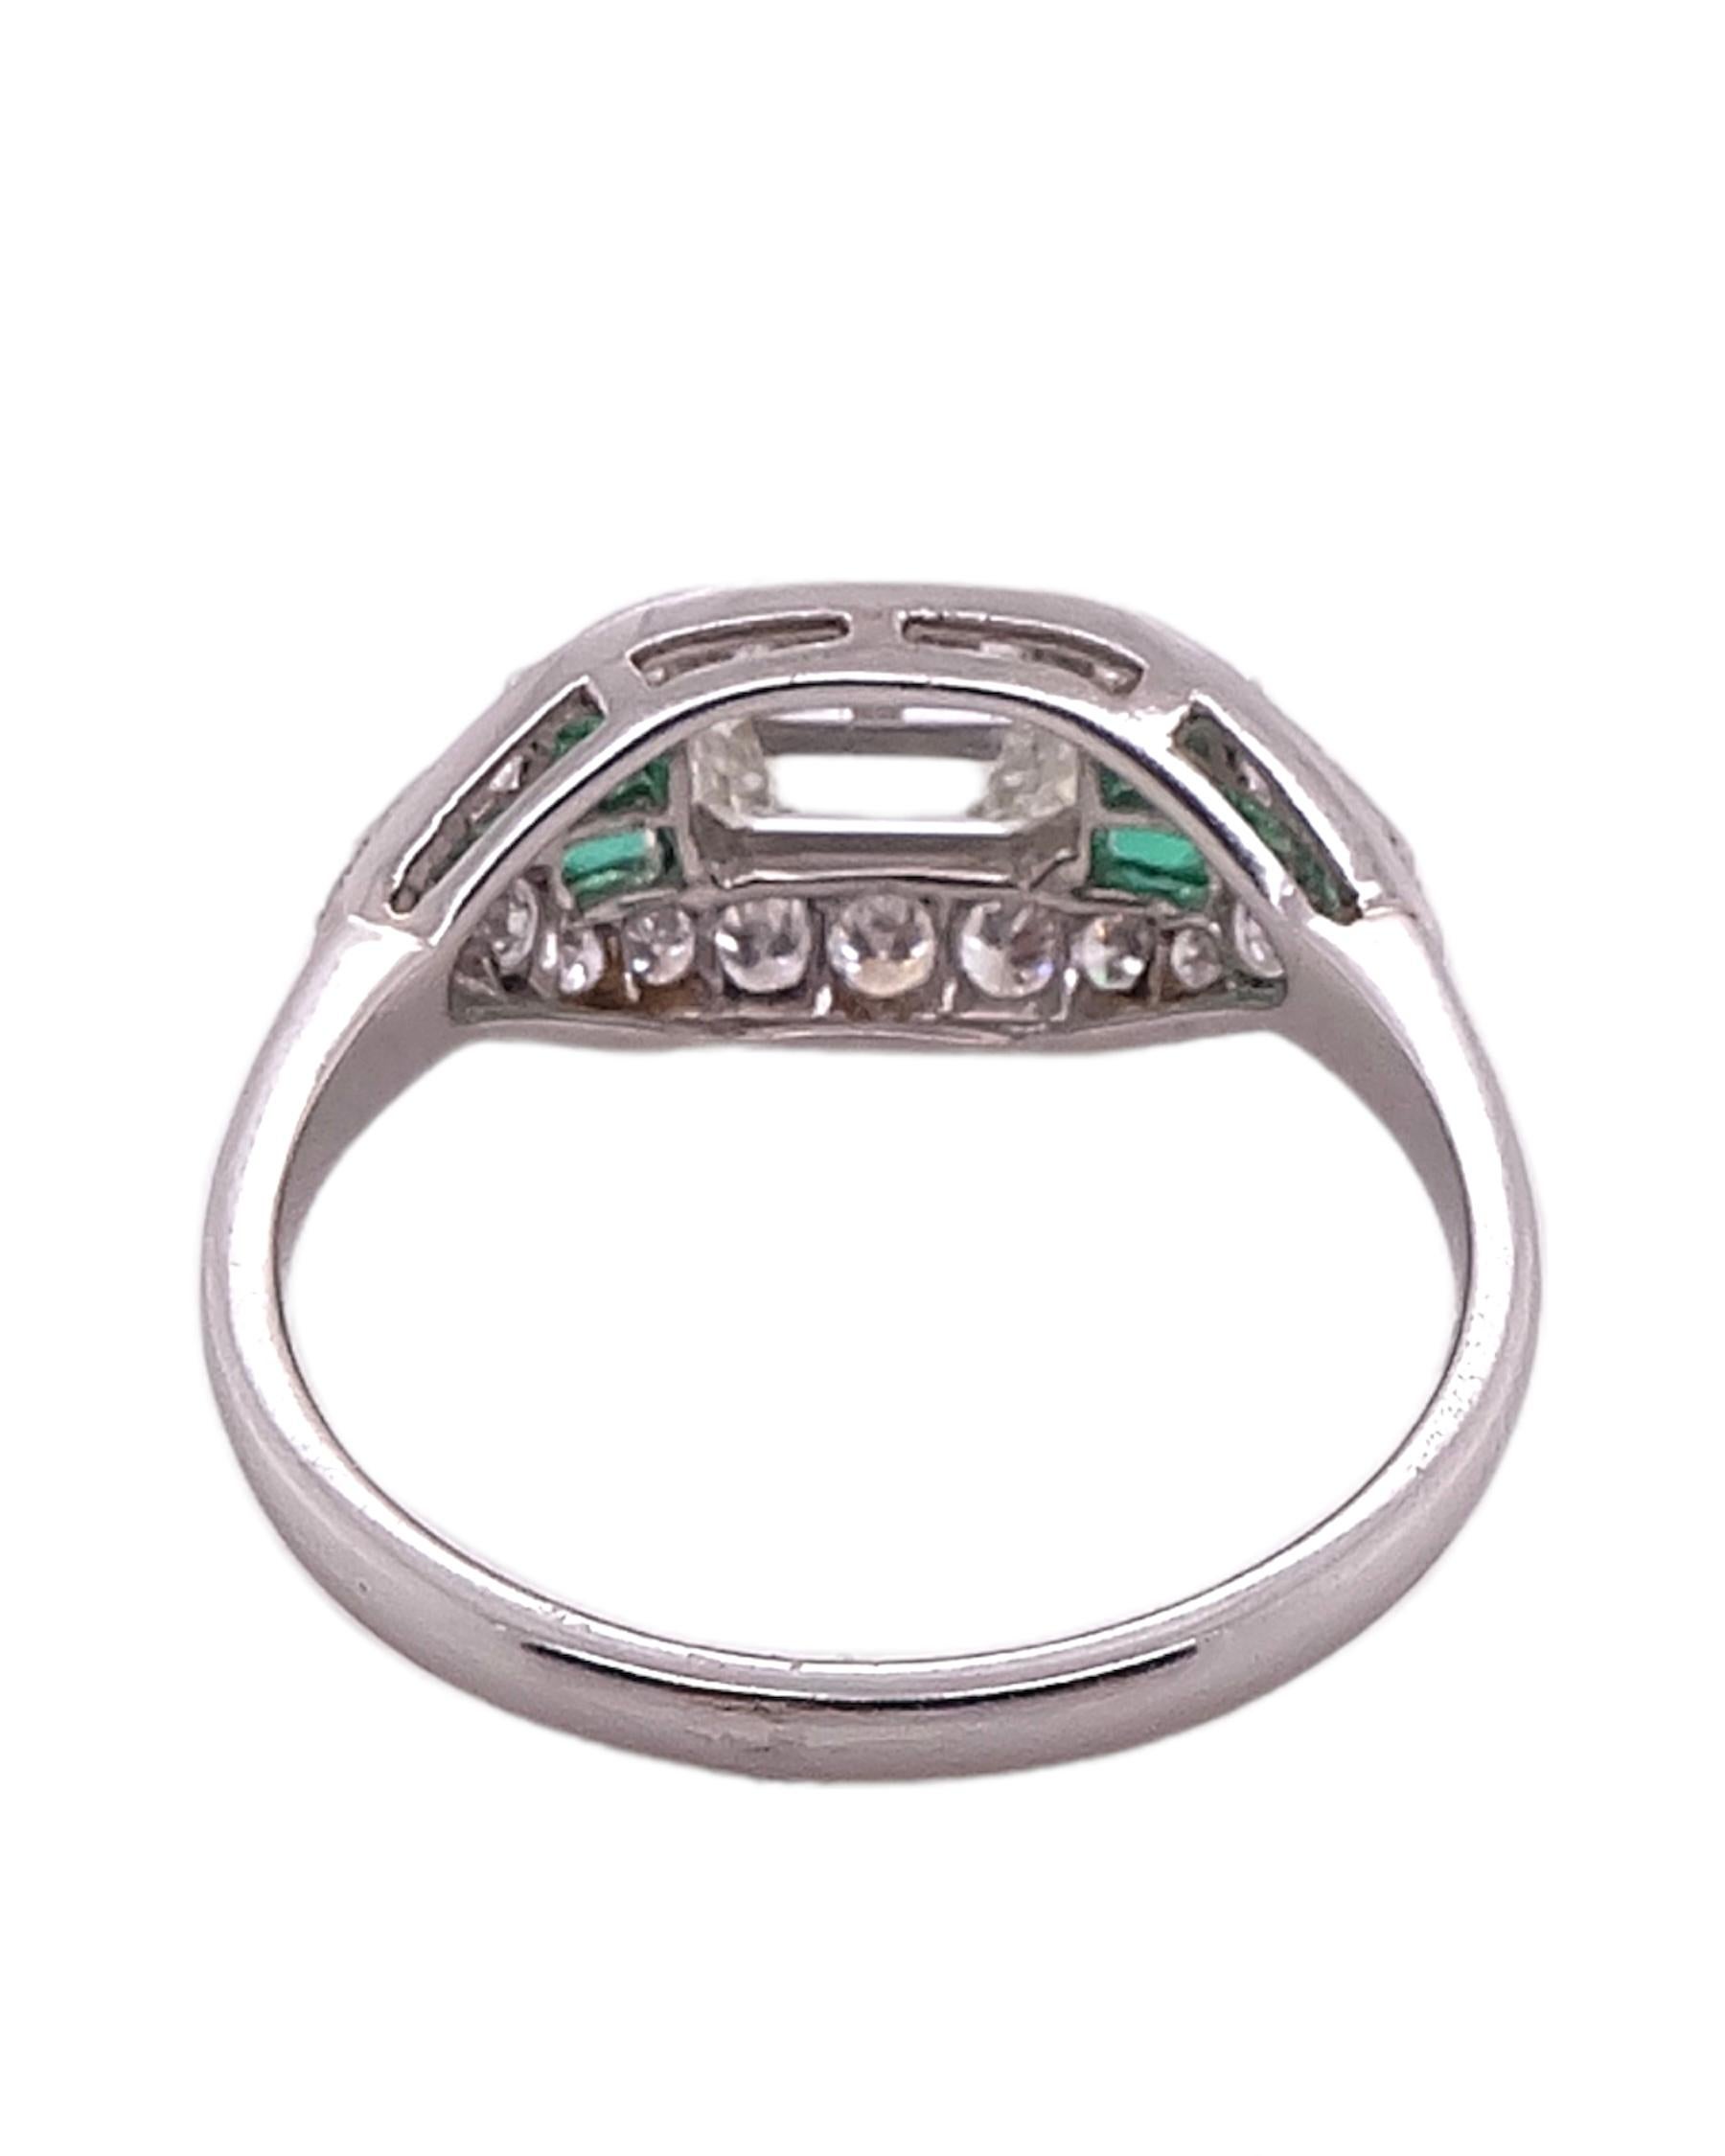 A Stunning Art deco style Diamond and Emerald ring by Sophia D that features a 0.78 carats of emerald cut center stone complemented with 0.37 carat small diamonds and 0.42 carat emerald stones. 

Sophia D by Joseph Dardashti LTD has been known